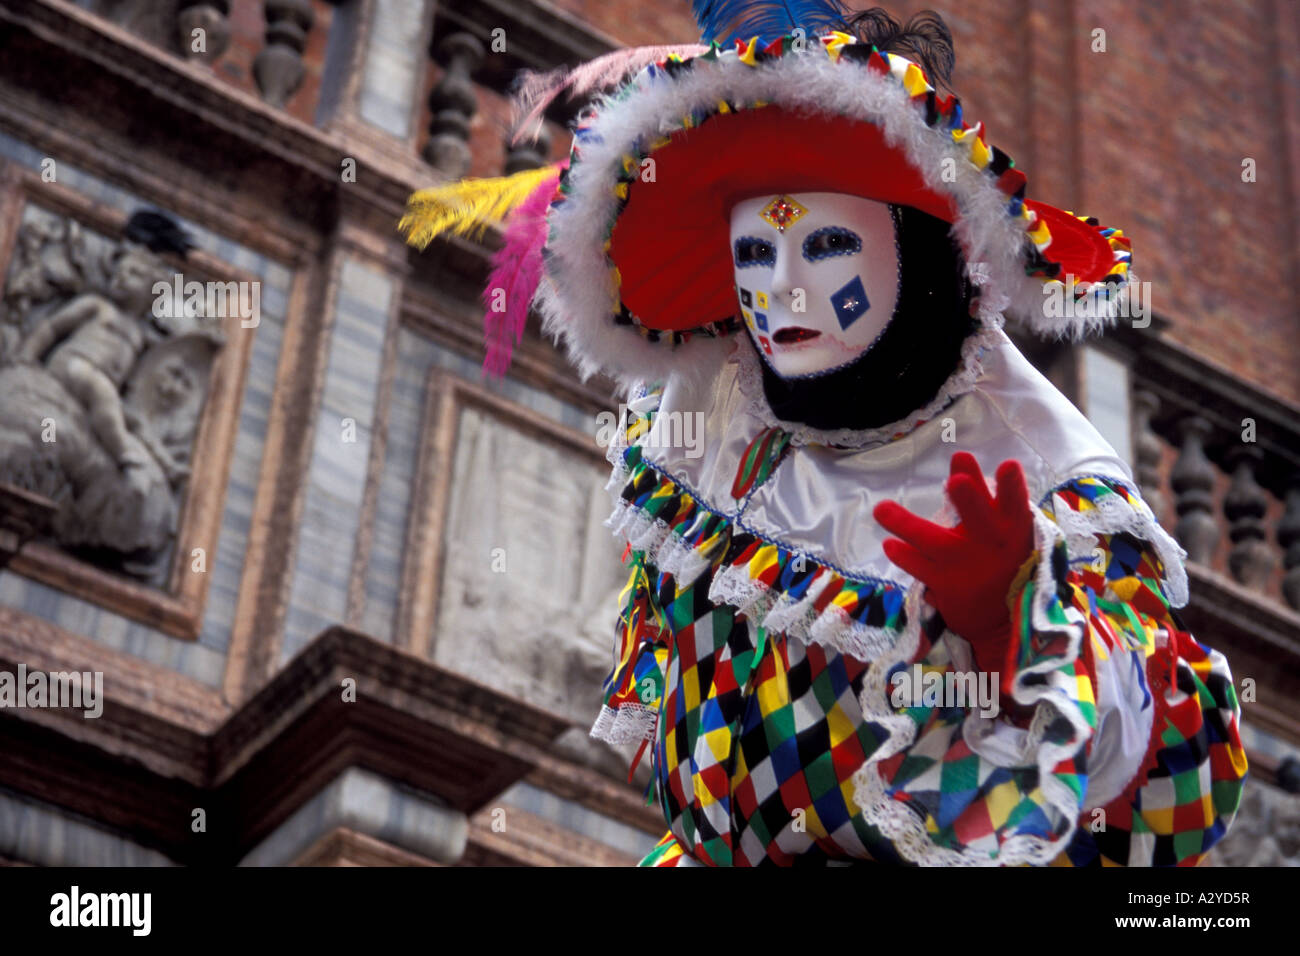 Colorful Harlequin Entertains at Carnevale in Venice, Italy Stock Photo